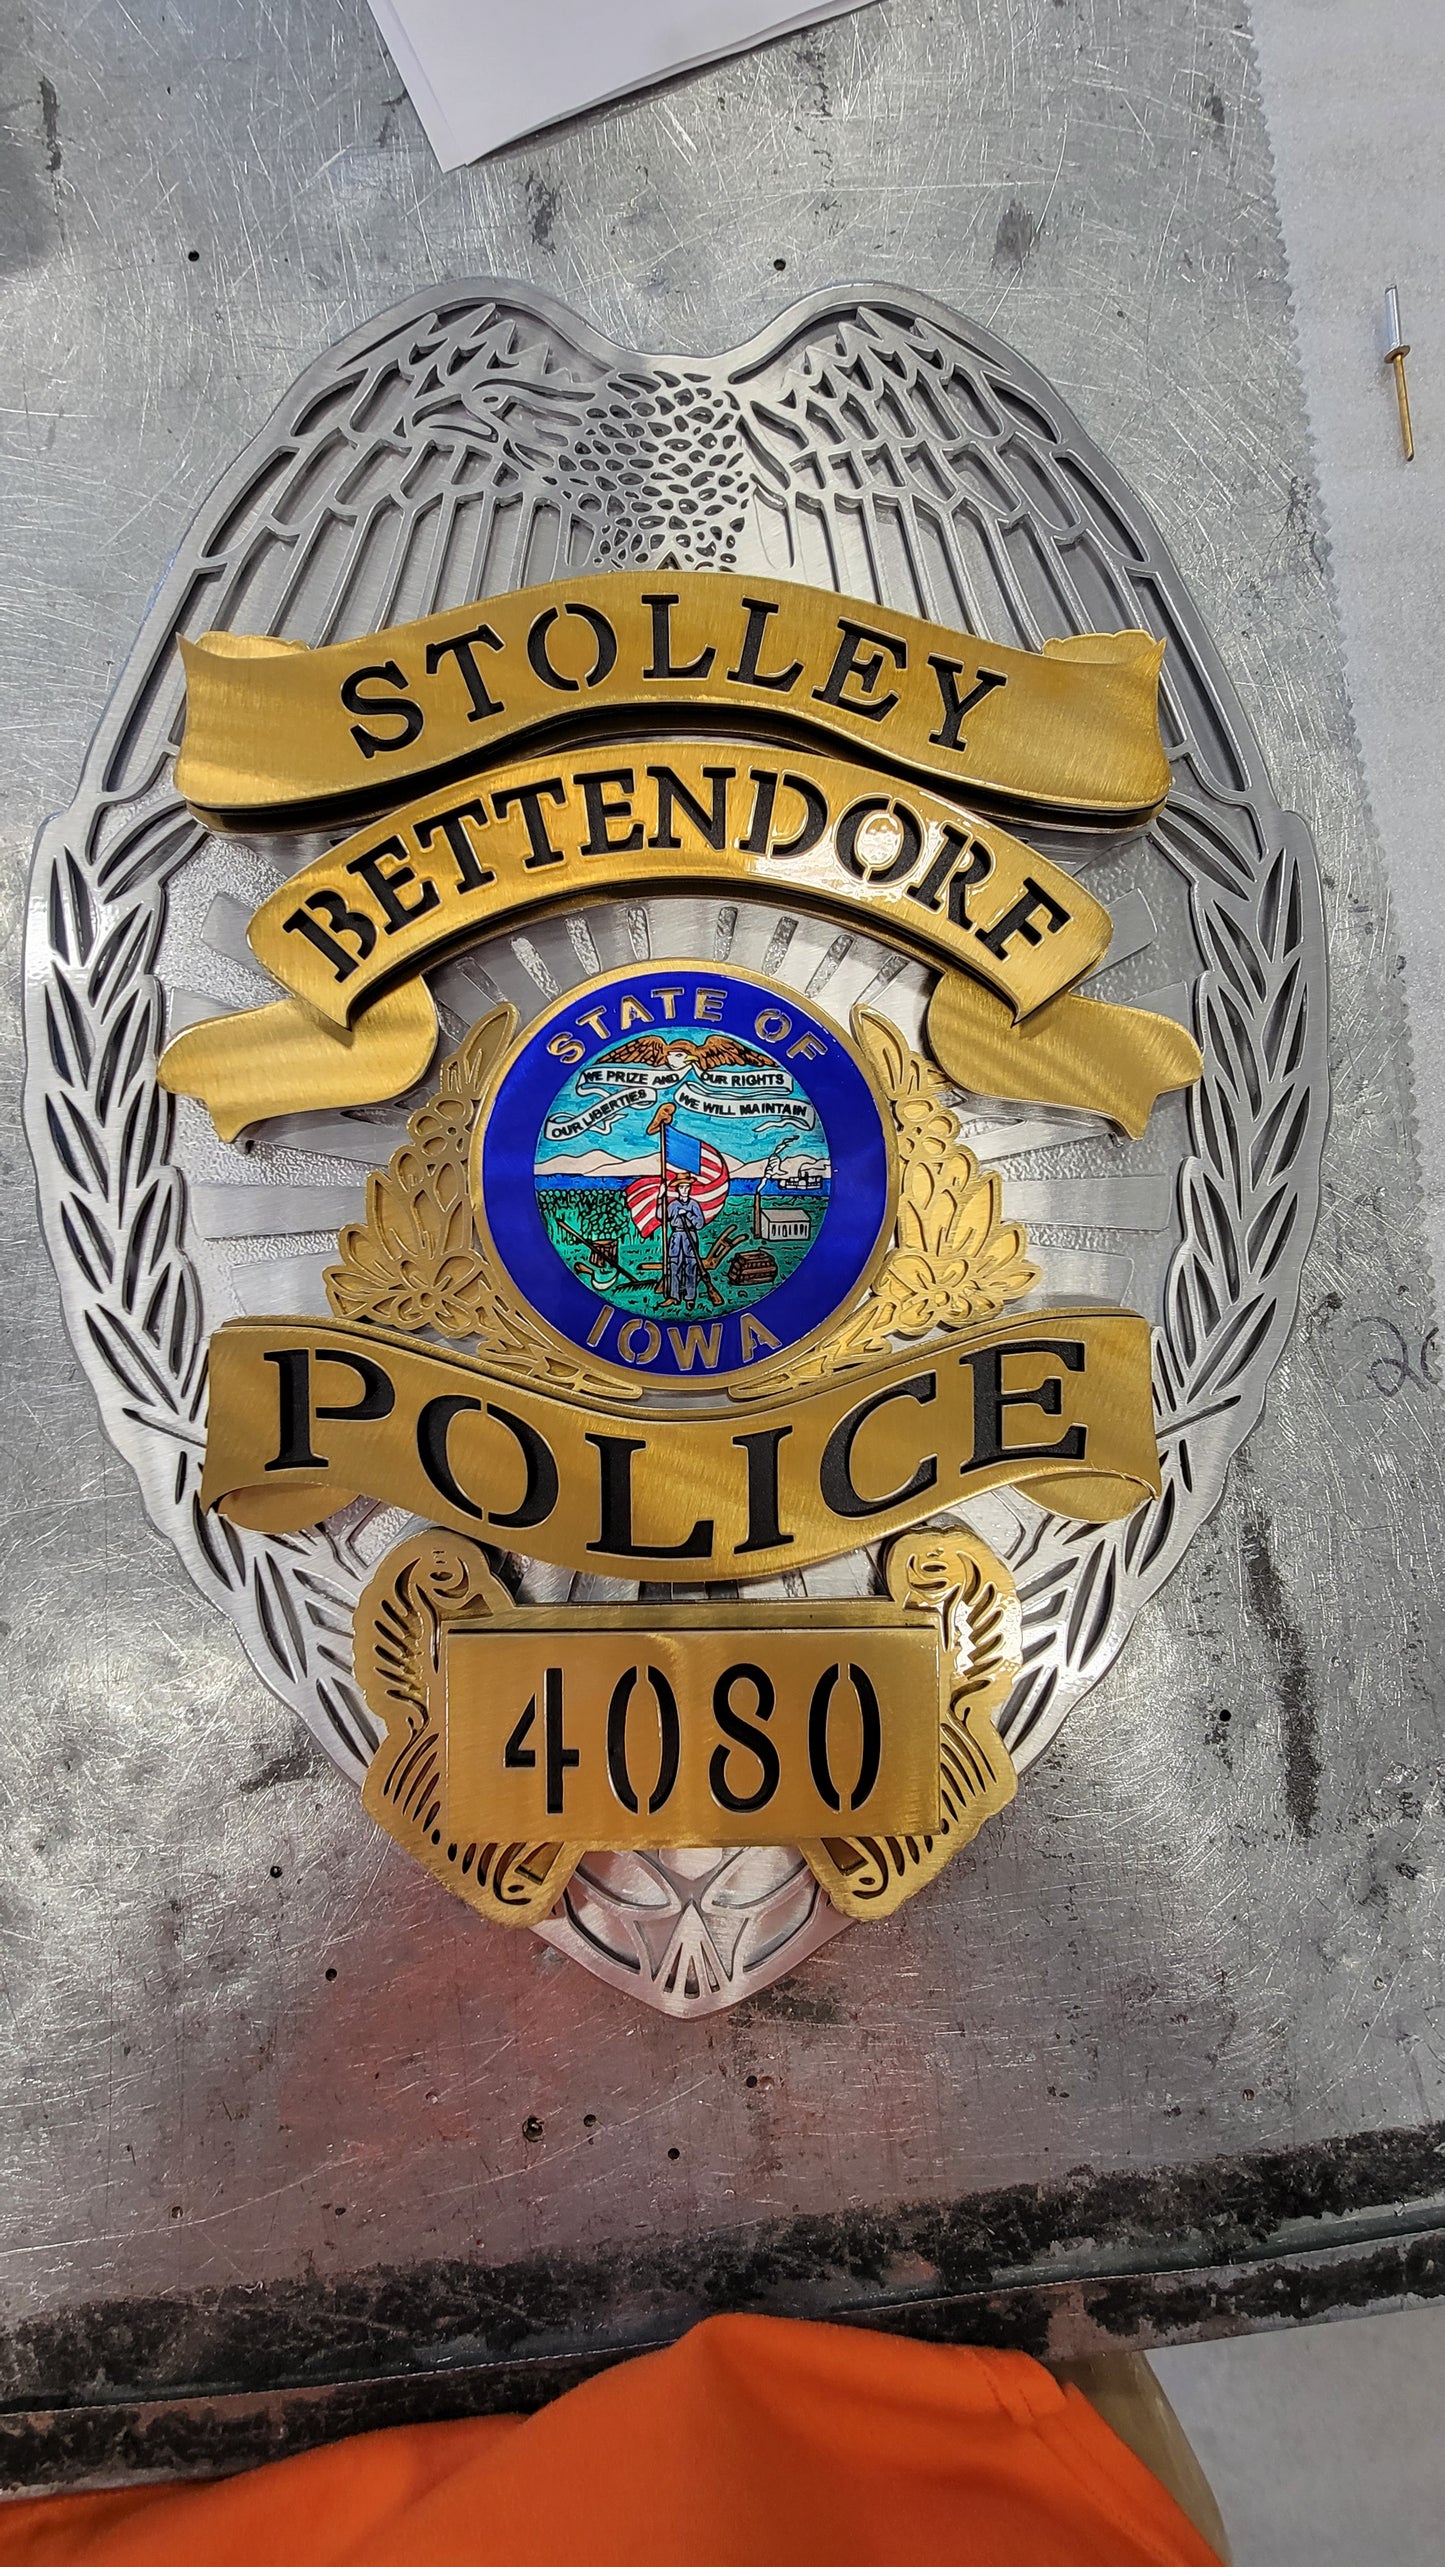 Stolley Bettendorf Police Badge